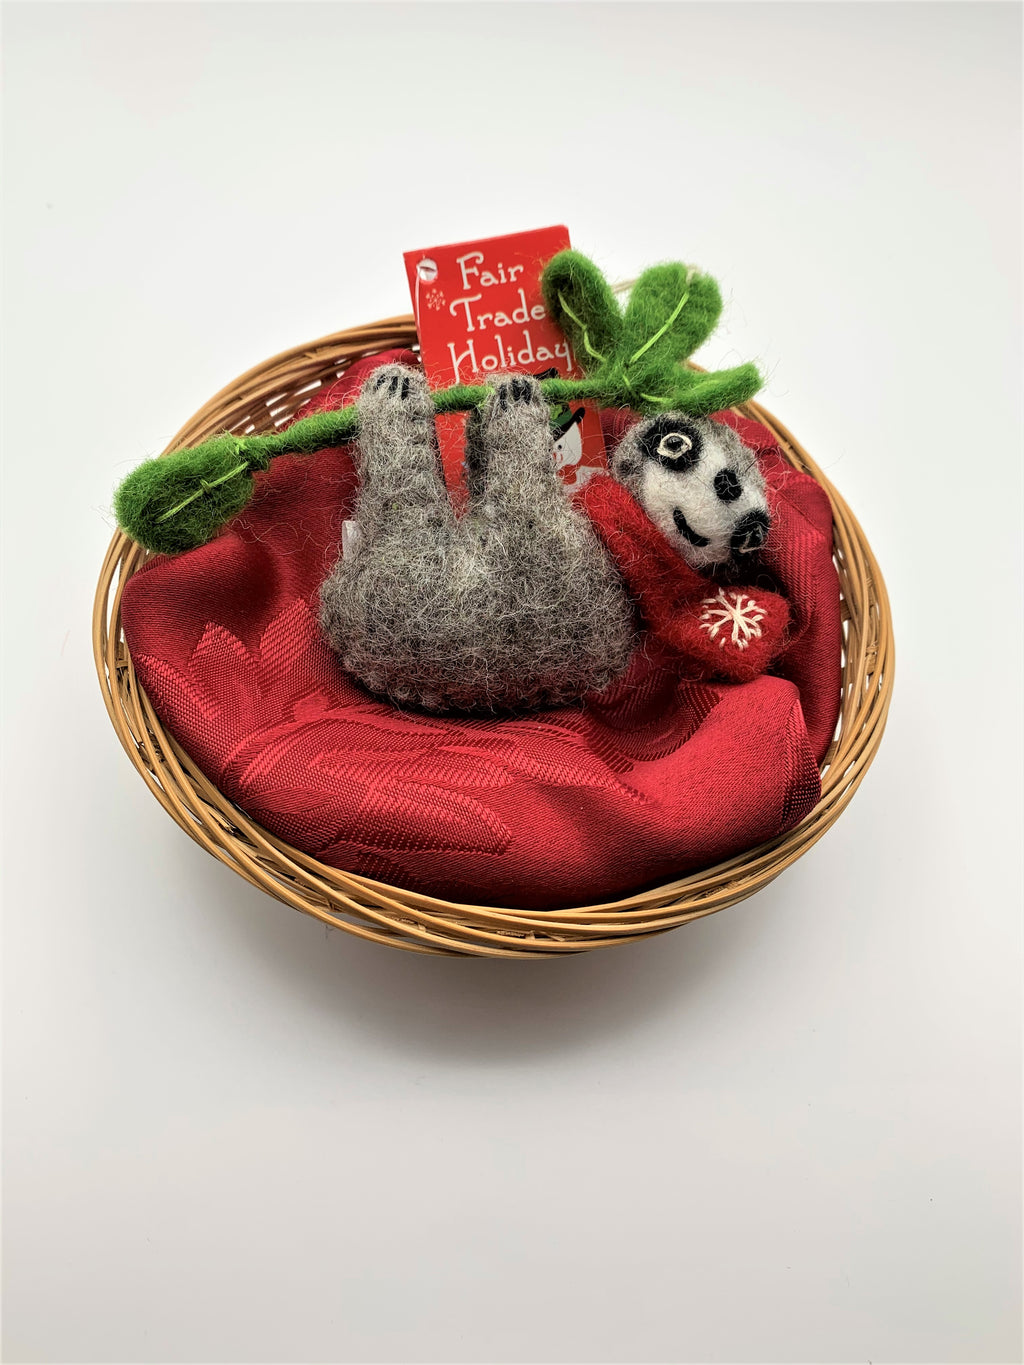 This sloth Christmas ornament is hand-crafted (fair trade) and made of 100% natural wool.  It is brownish-gray with an off-white face, with black accents (nose, mouth, etc) and is wearing a red winter scarf with the 'signature' (white) snowflake on it.  It is hanging from a green branch with green leaves. Approximately 4.75"x4.25". It comes with a detachable fair trade "to/from" tag to use if giving as a gift.